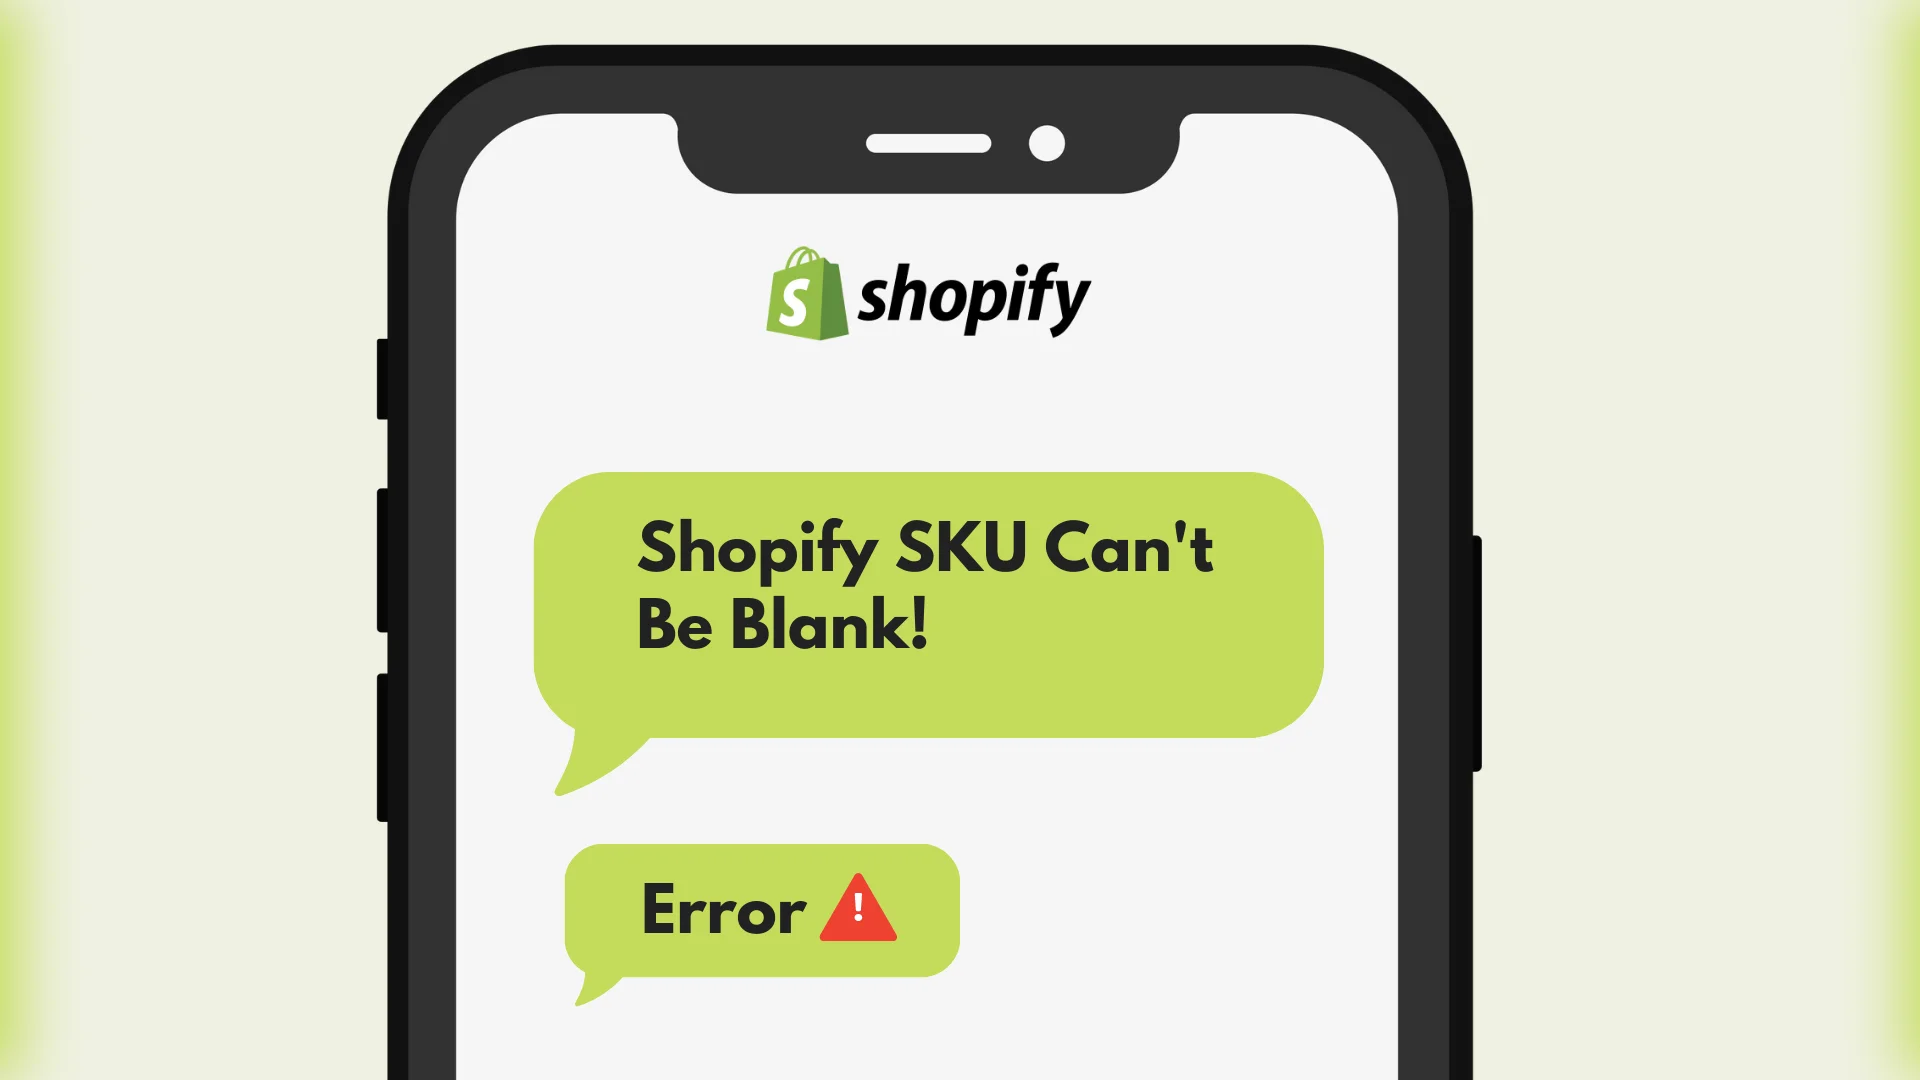 Shopify SKU Cant Be Blank